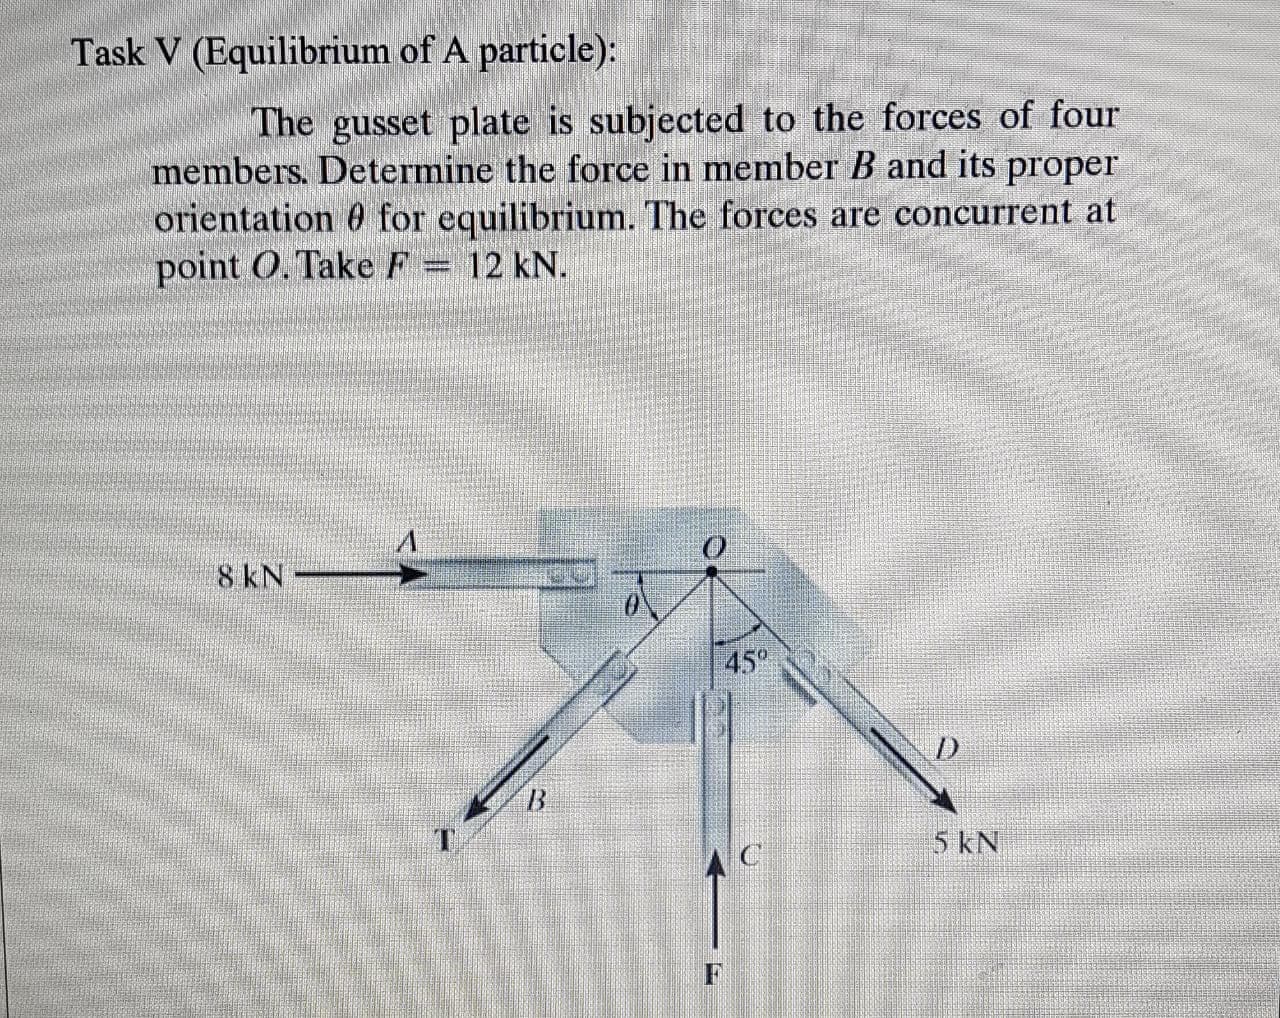 The gusset plate is subjected to the forces of four
members. Determine the force in member B and its proper
orientation 0 for equilibrium. The forces are concurrent at
point O. Take F = 12 kN.
